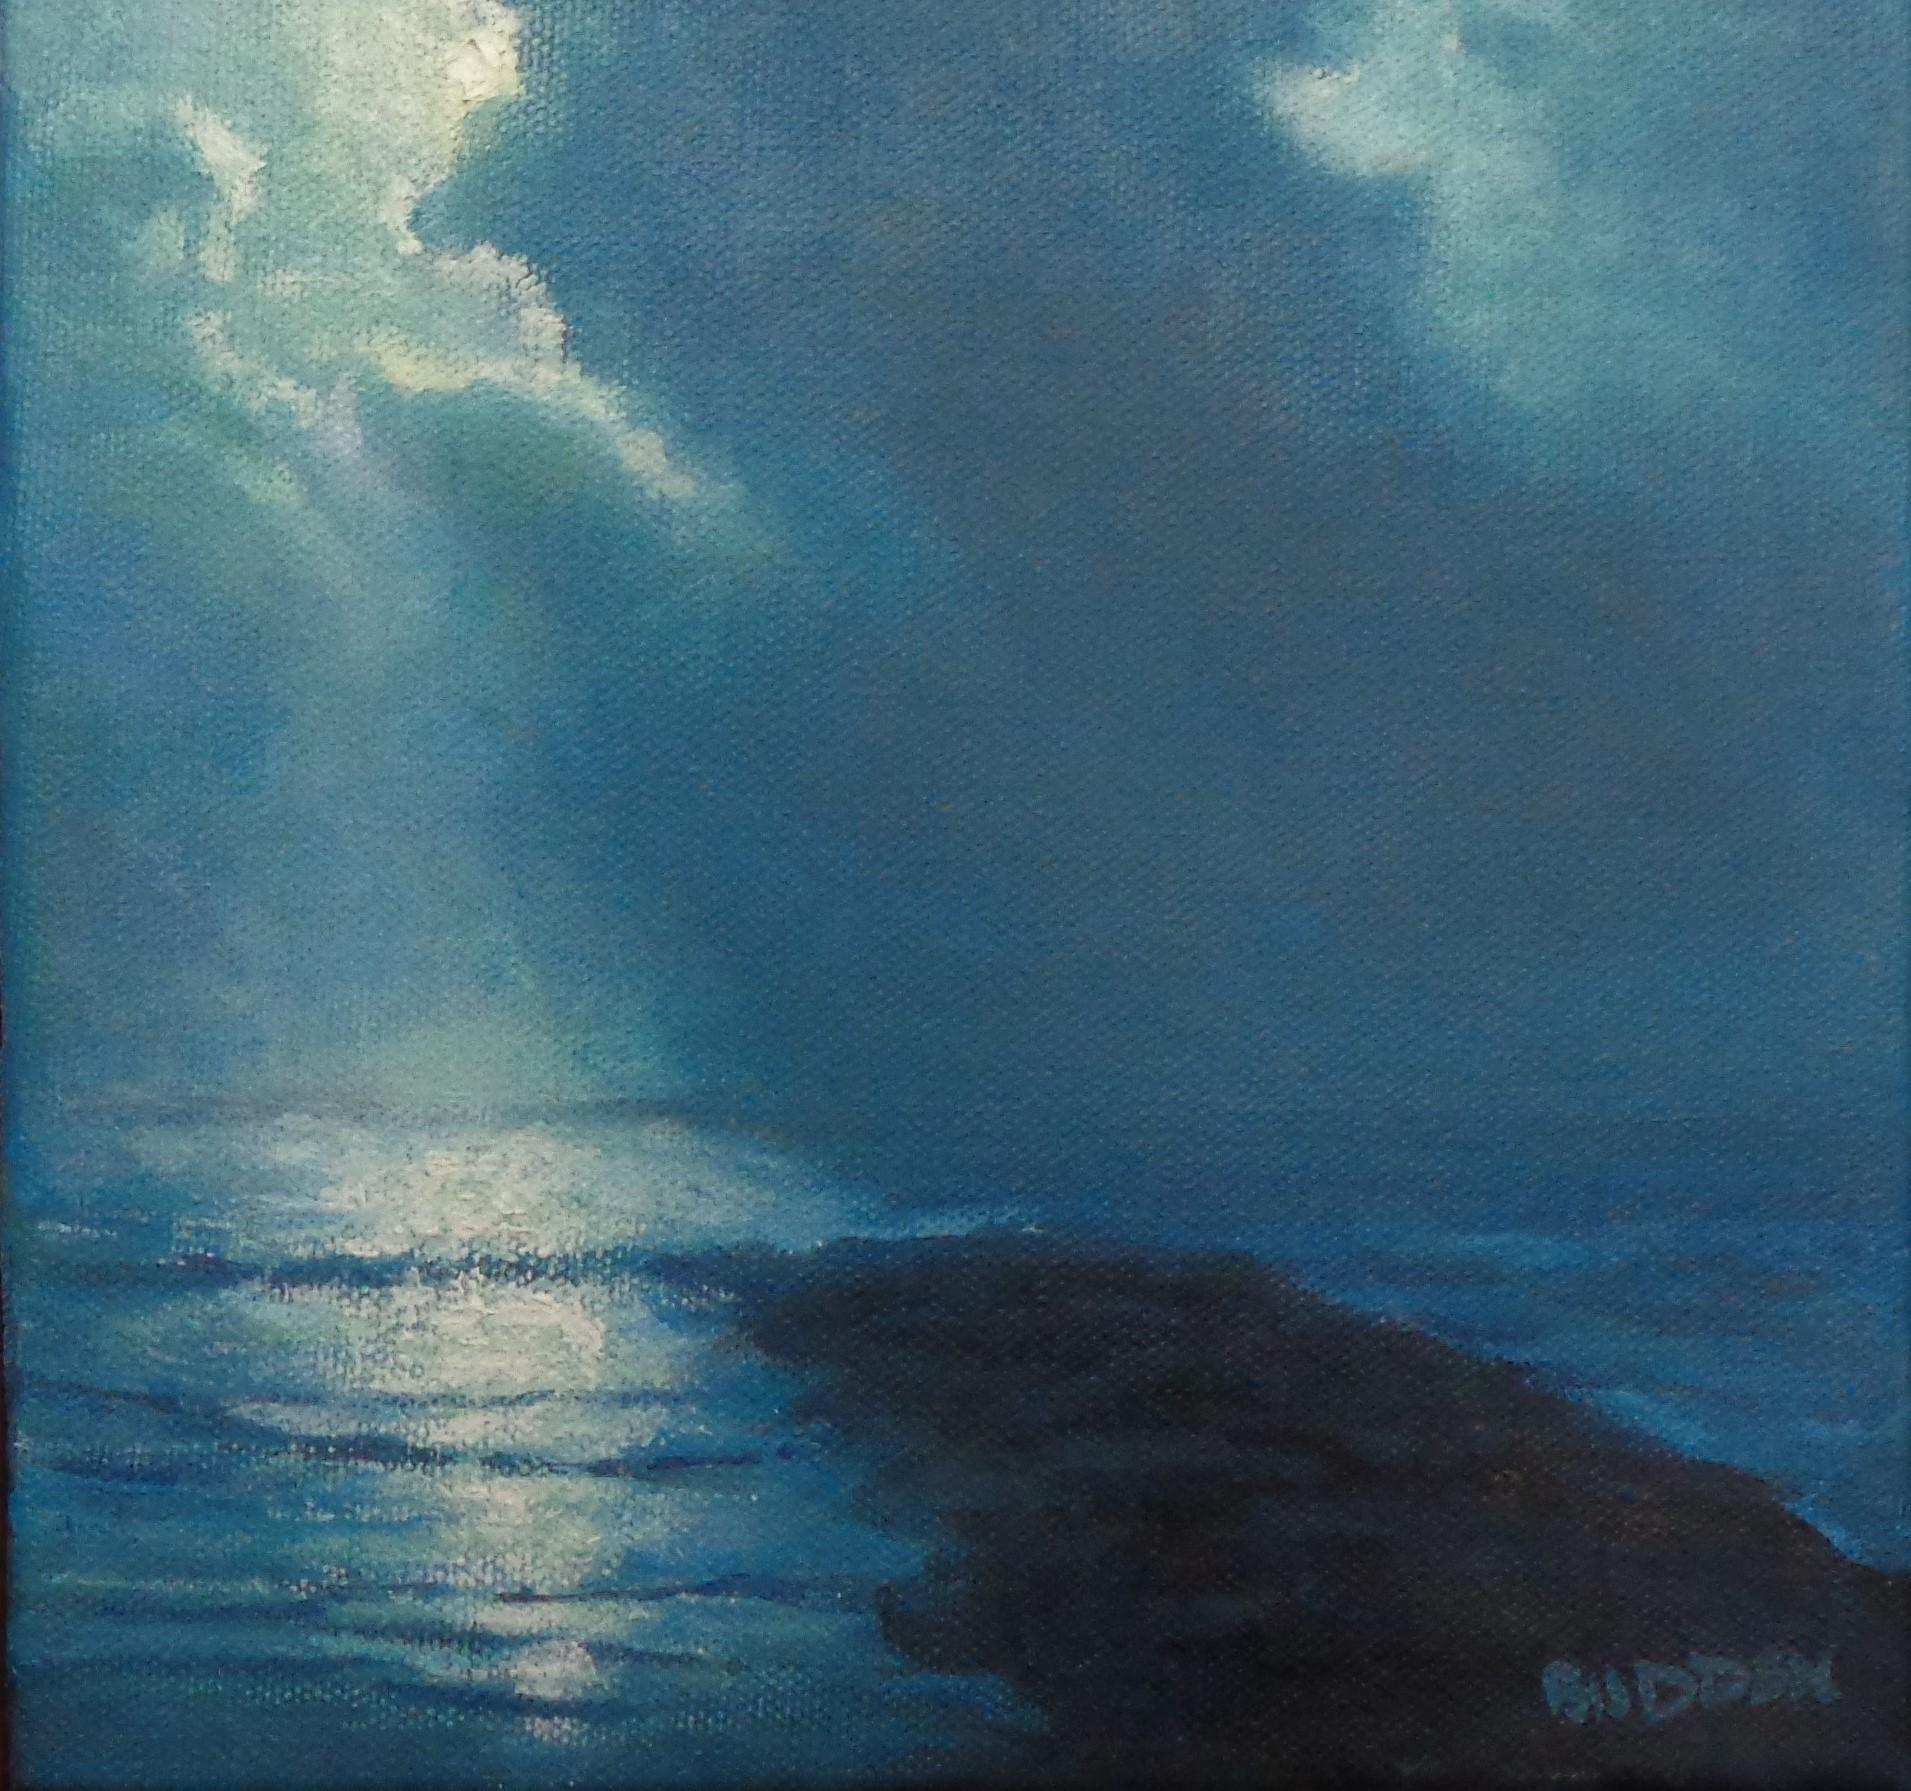  Impressionistic Moonlight Seascape Oil Painting with jetty by Michael Budden For Sale 1